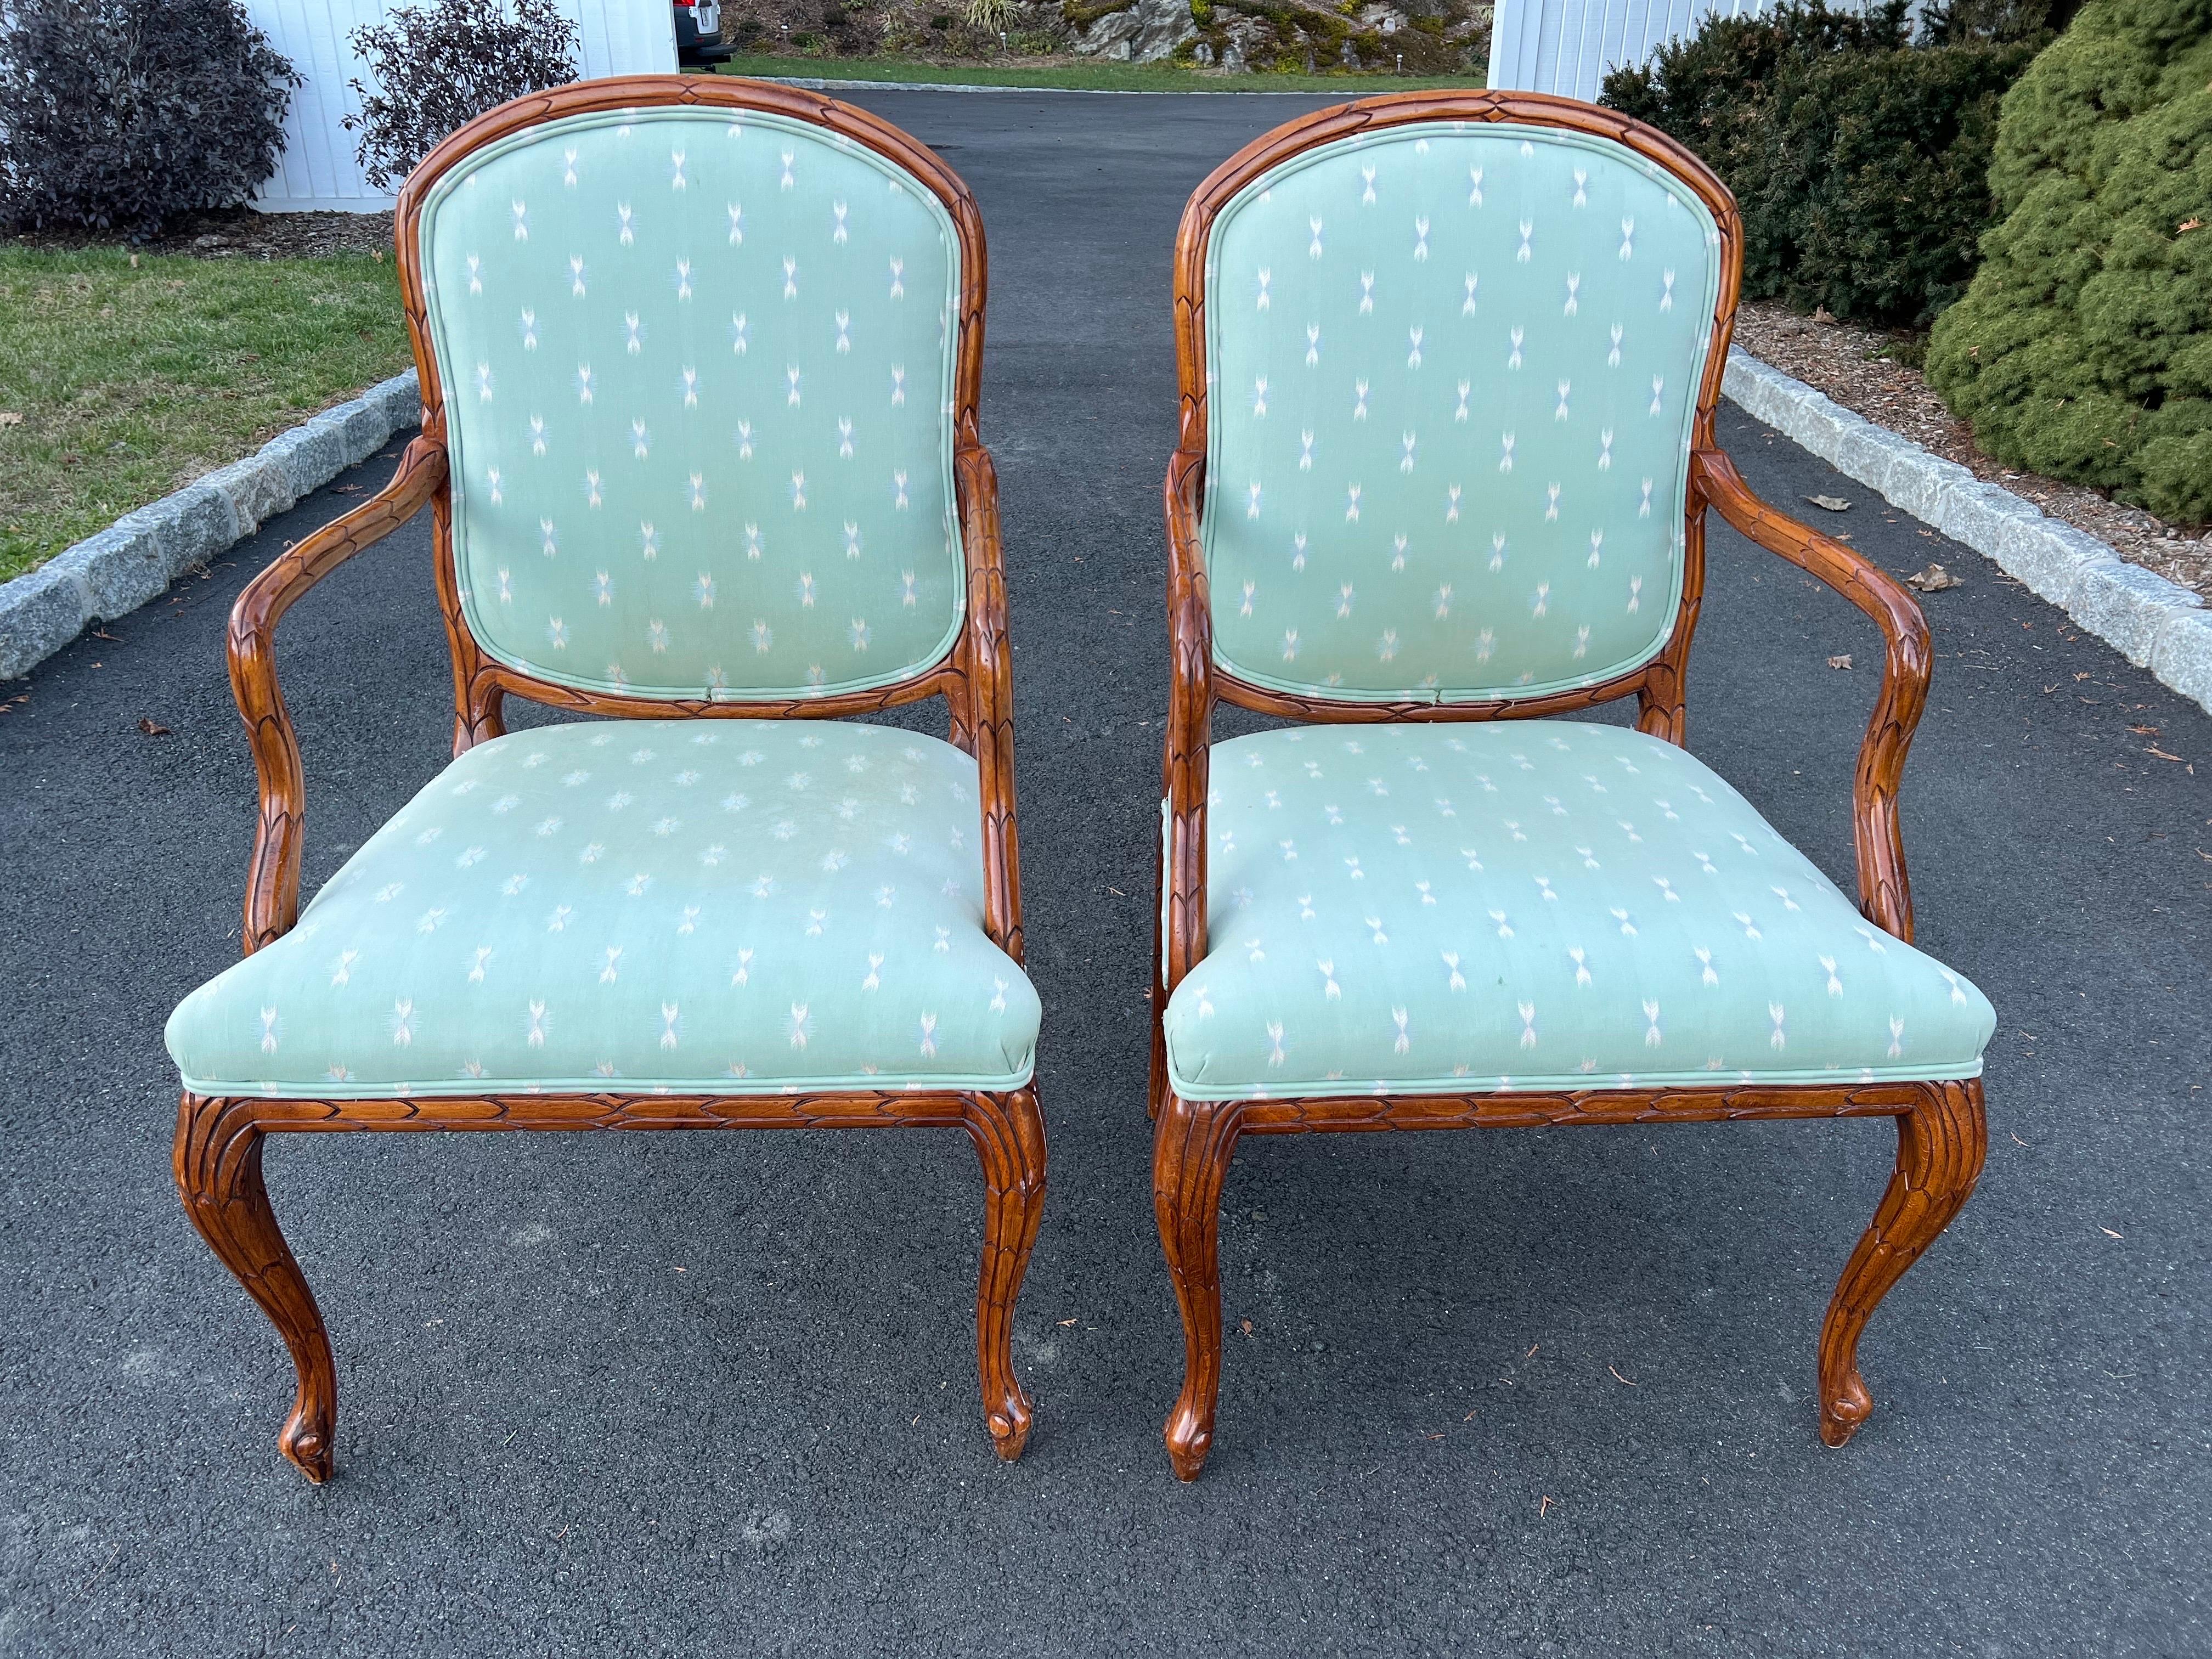 Hollywood Regency Pair of Faux Bois Bergères in the style of Serge Roche For Sale